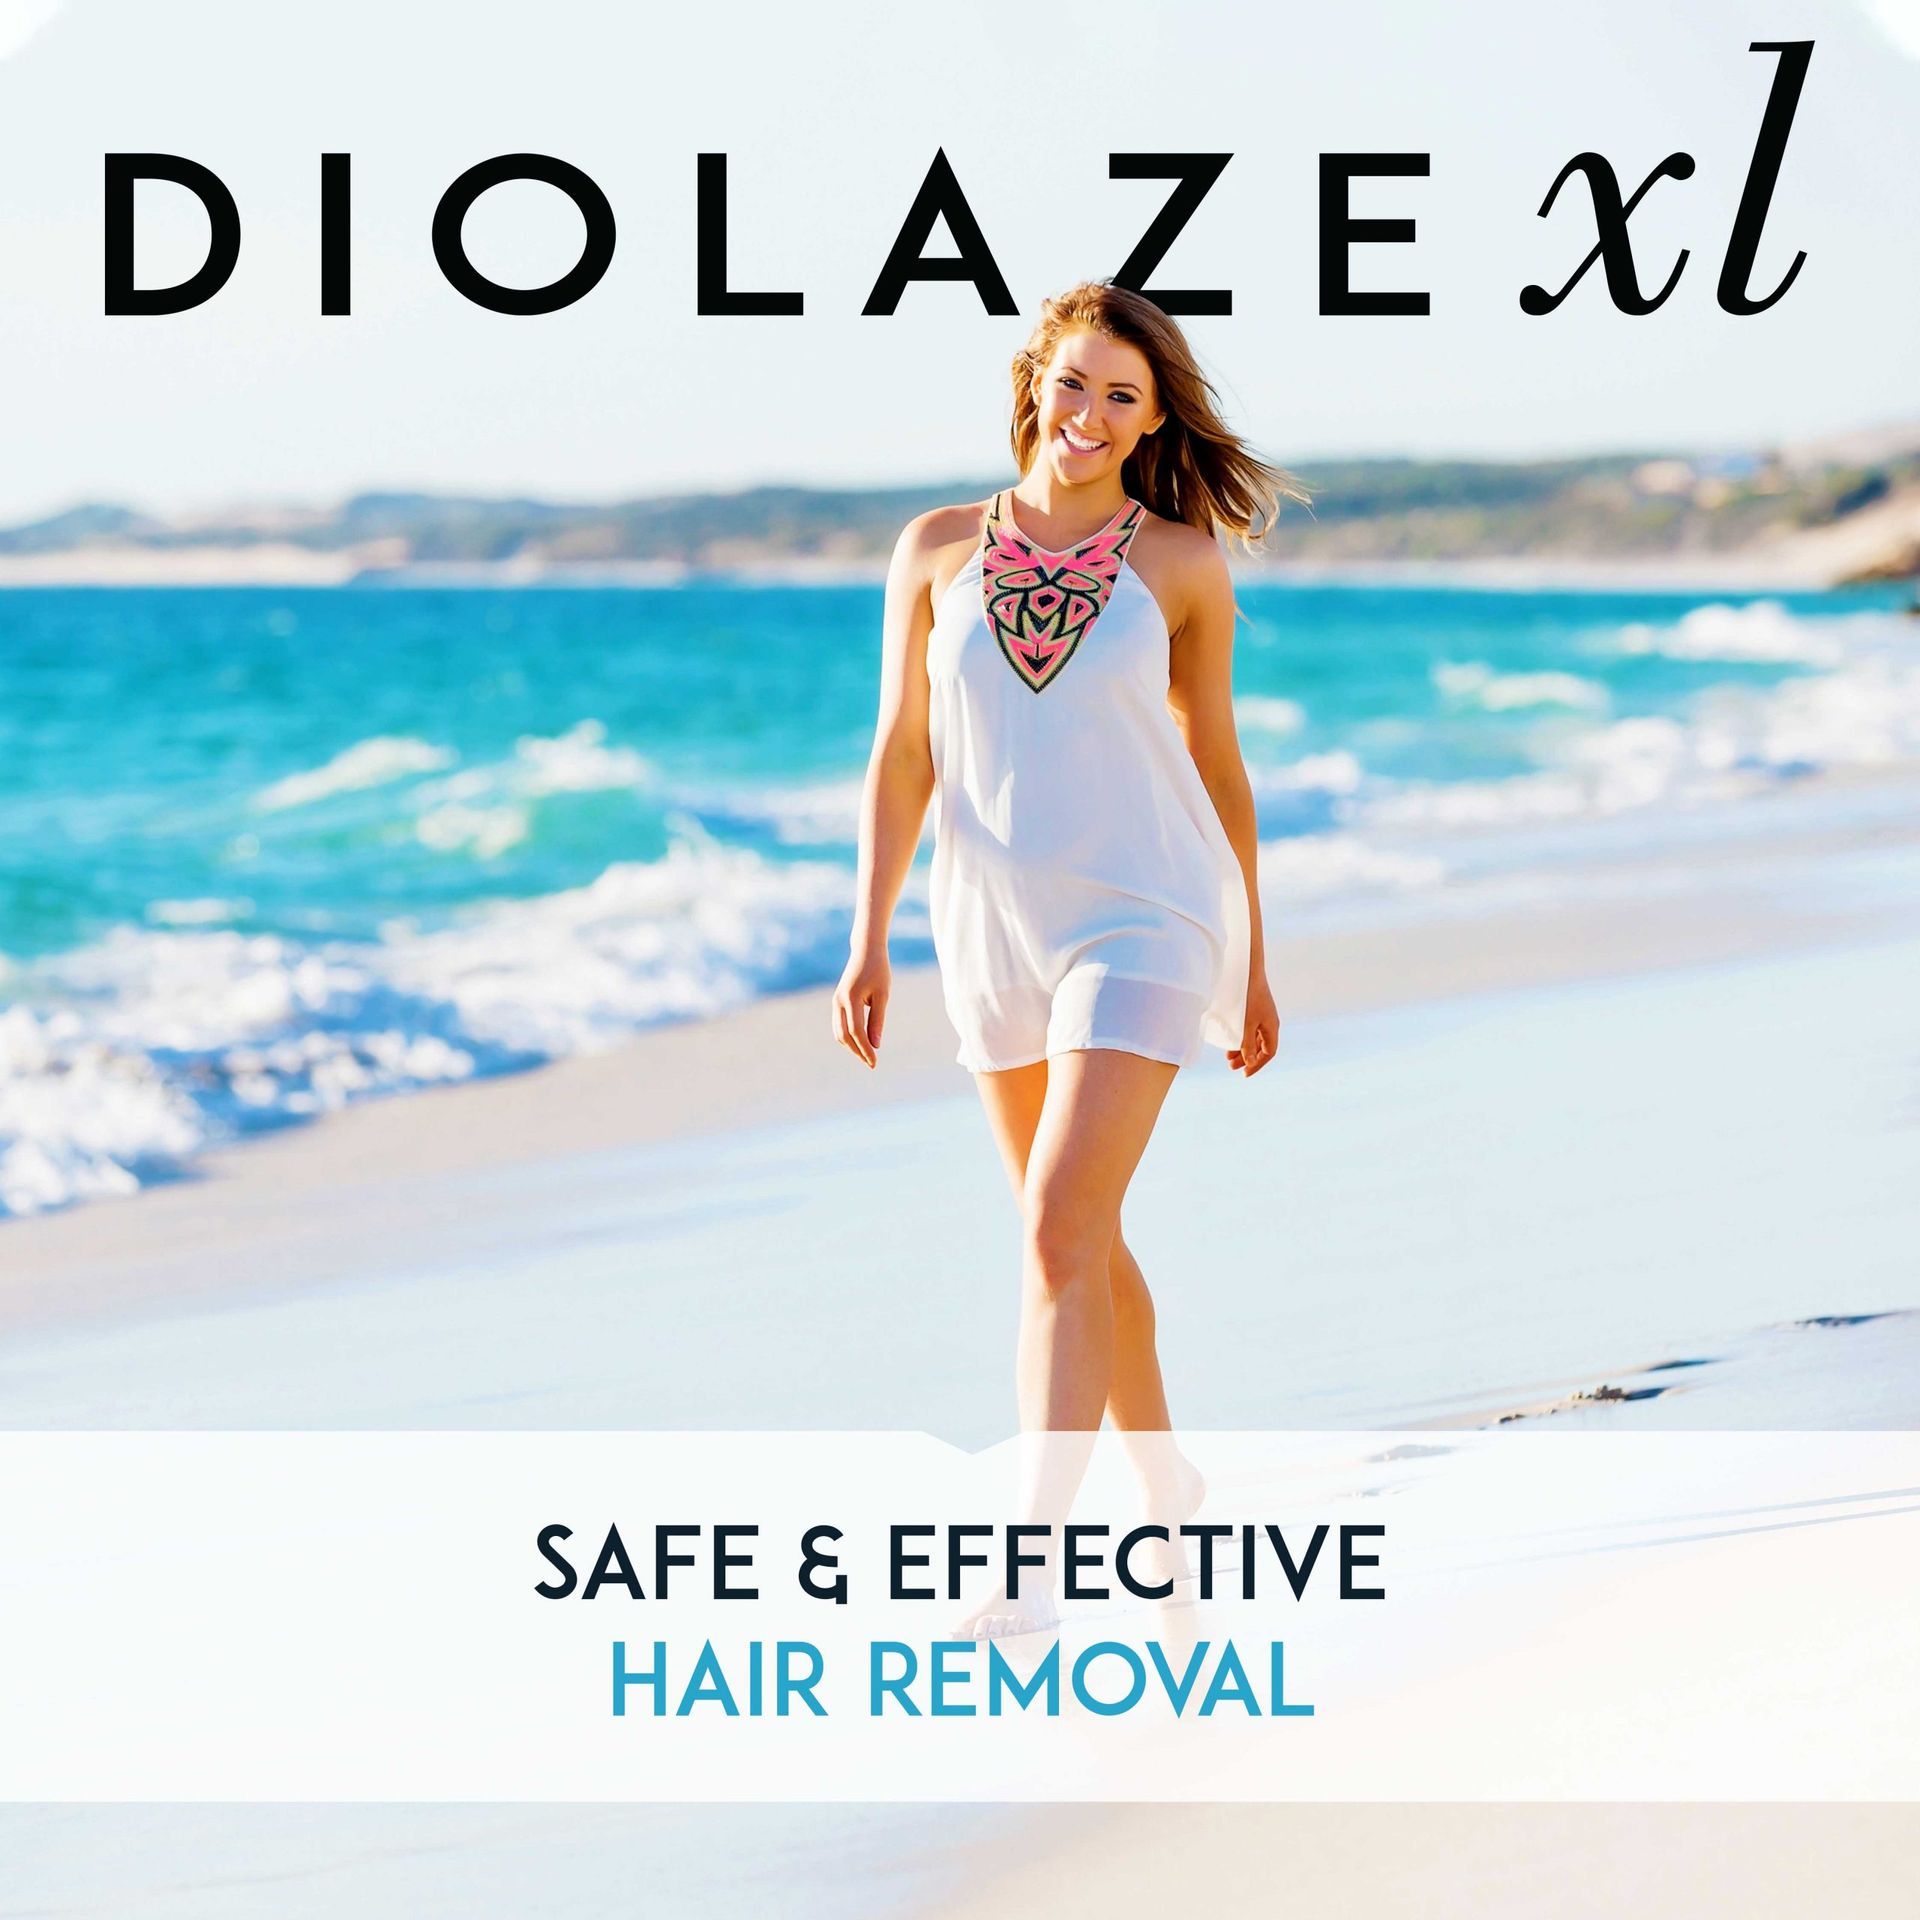 laser hair removal diolaze xl marketing poster